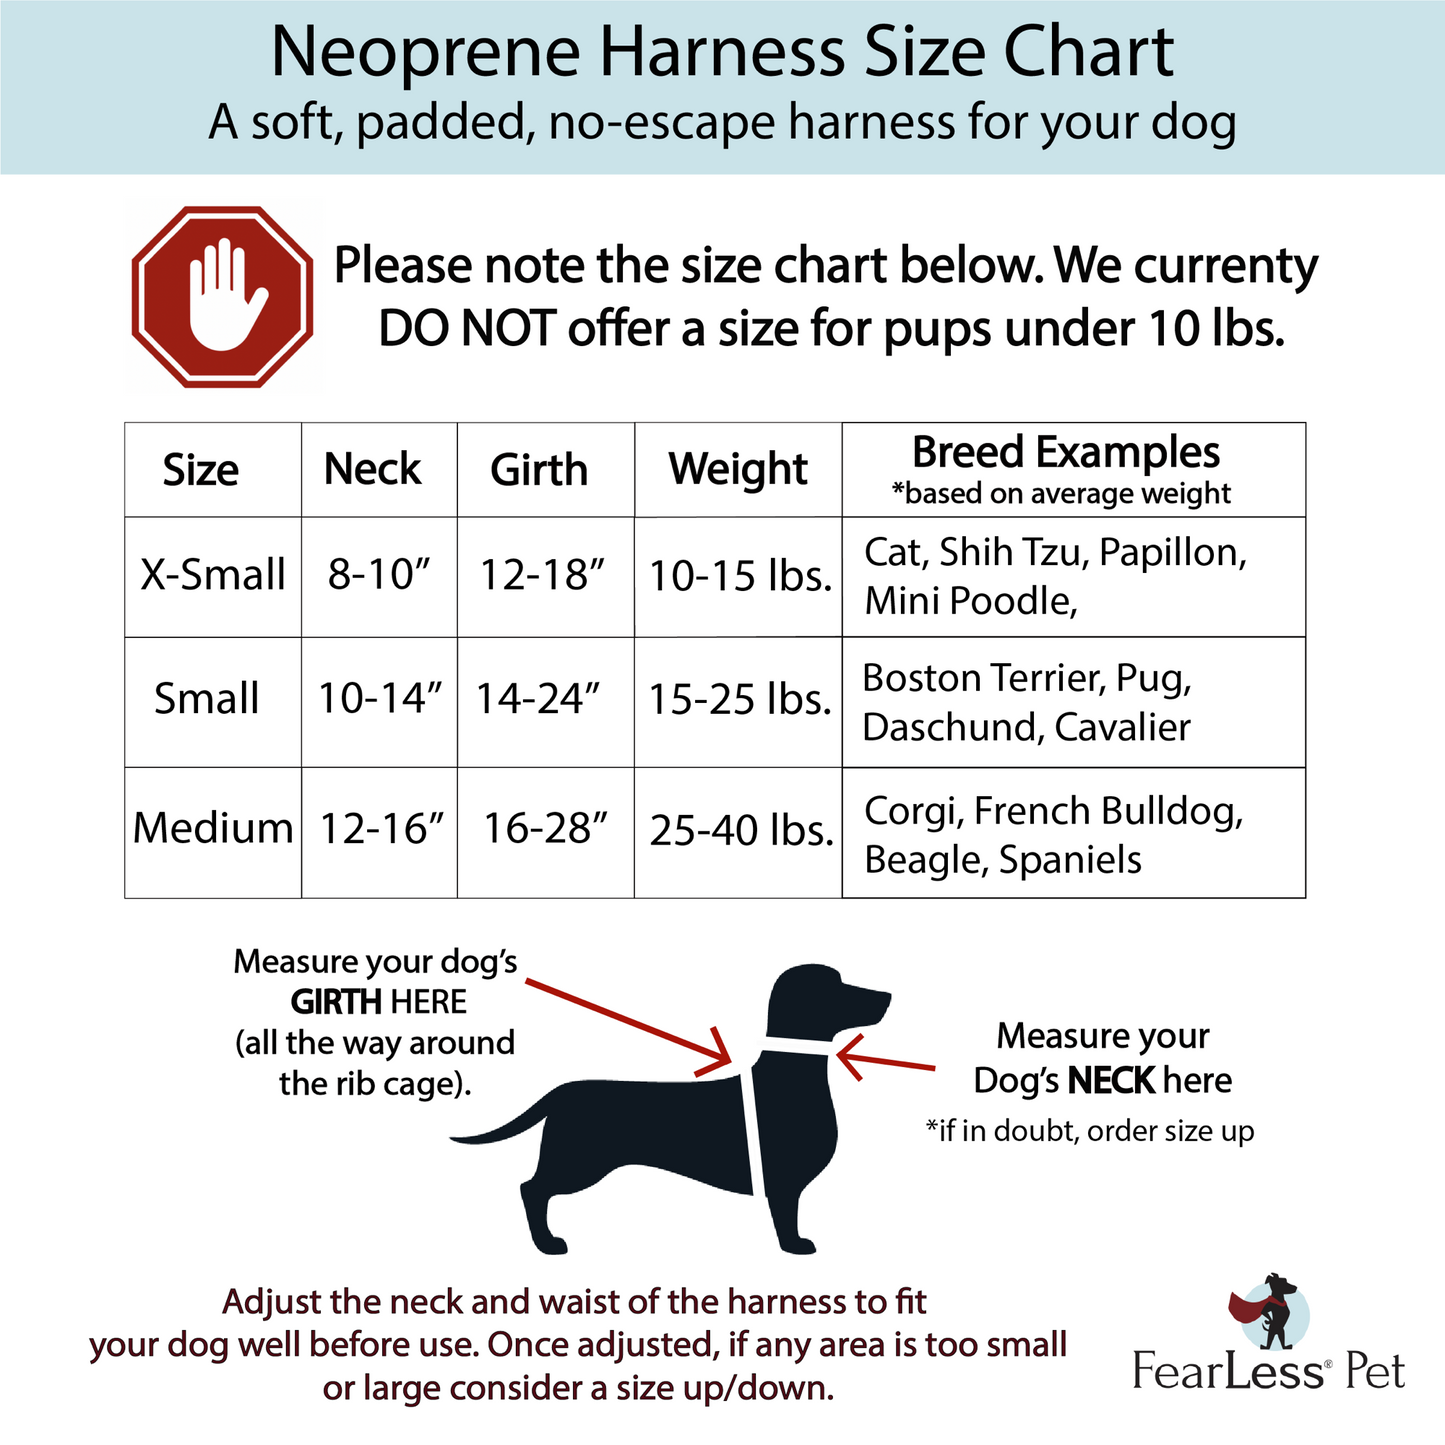 a size chart for extra small, small and medium dog harnesses from fearless pet. the size chart shows weights and measurements for the harness